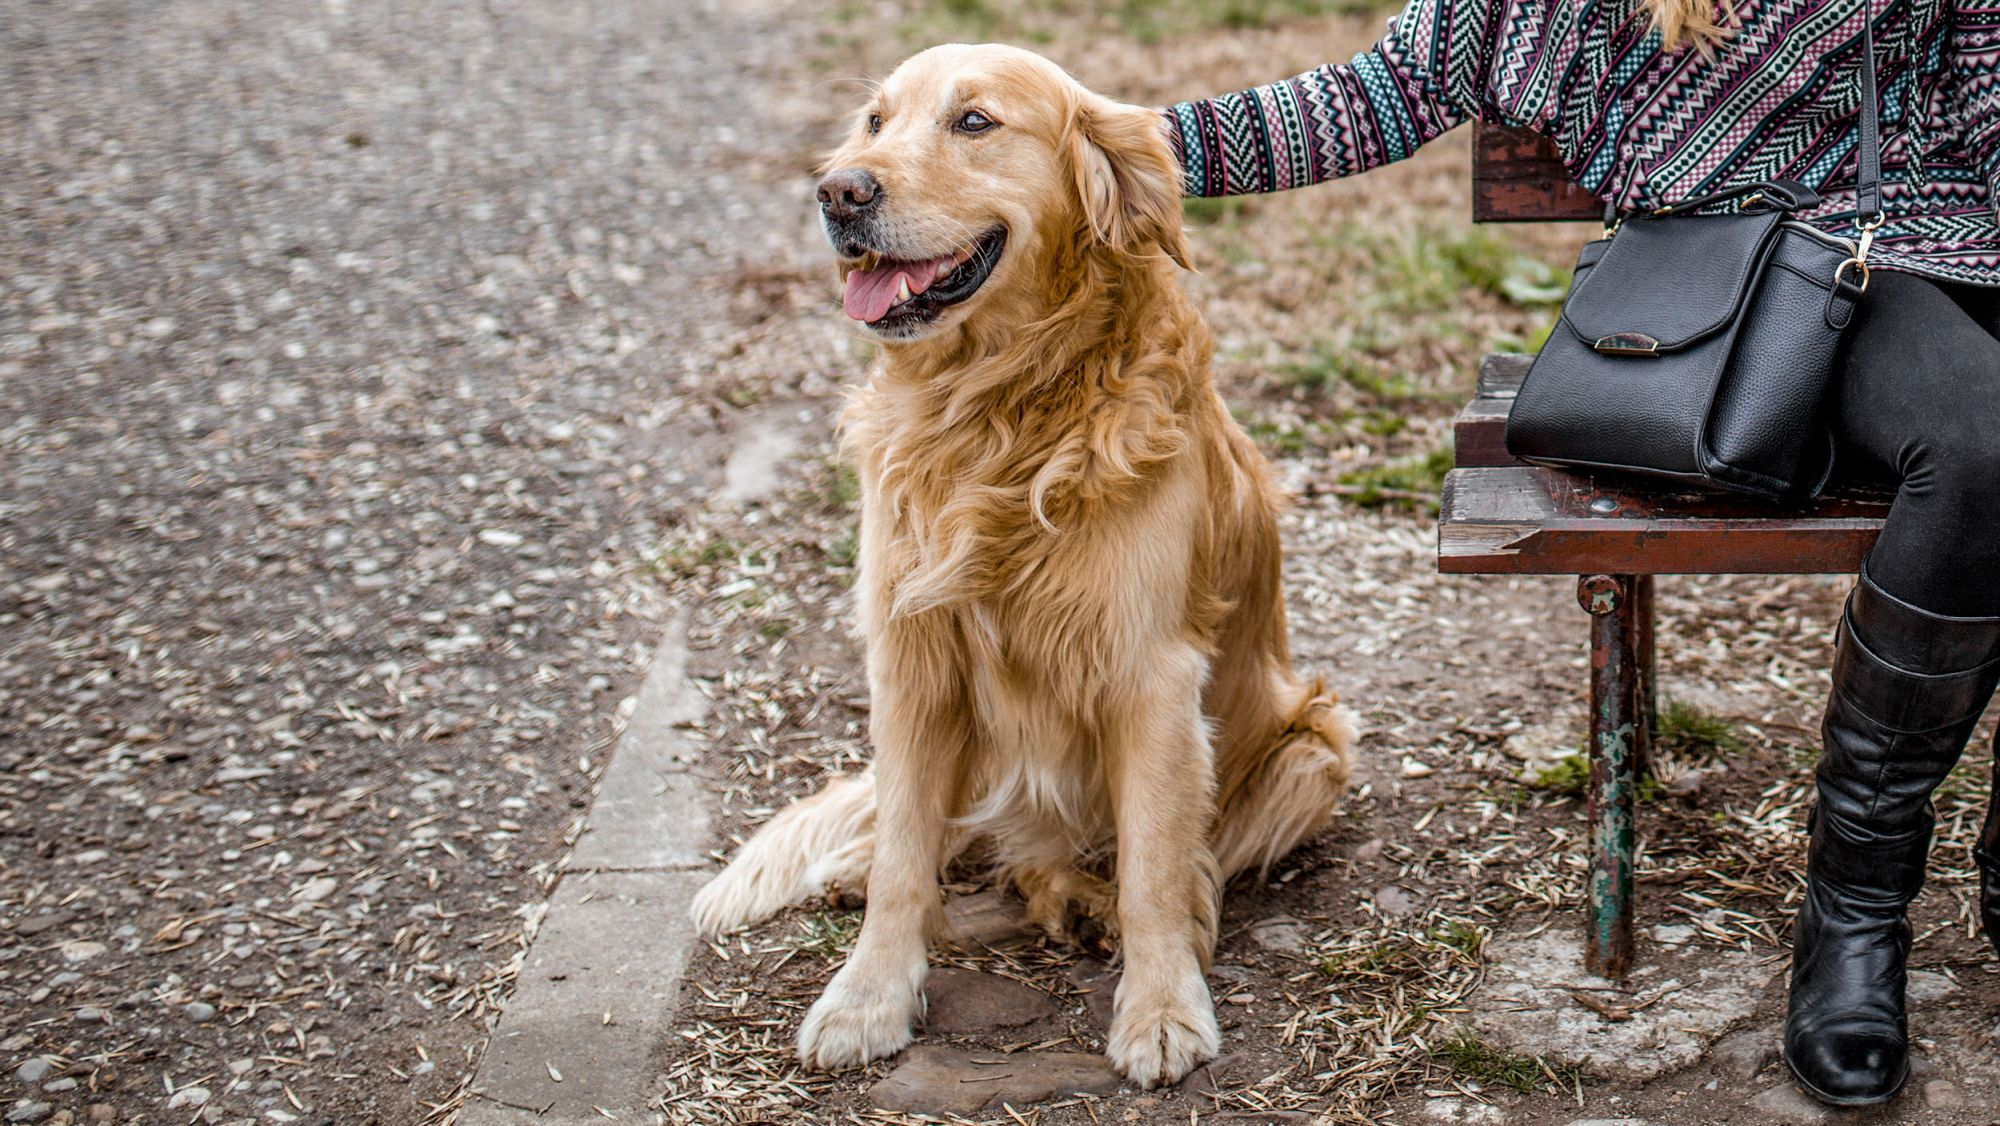 Golden Retriever sitting next to a bench being stroked by its owner